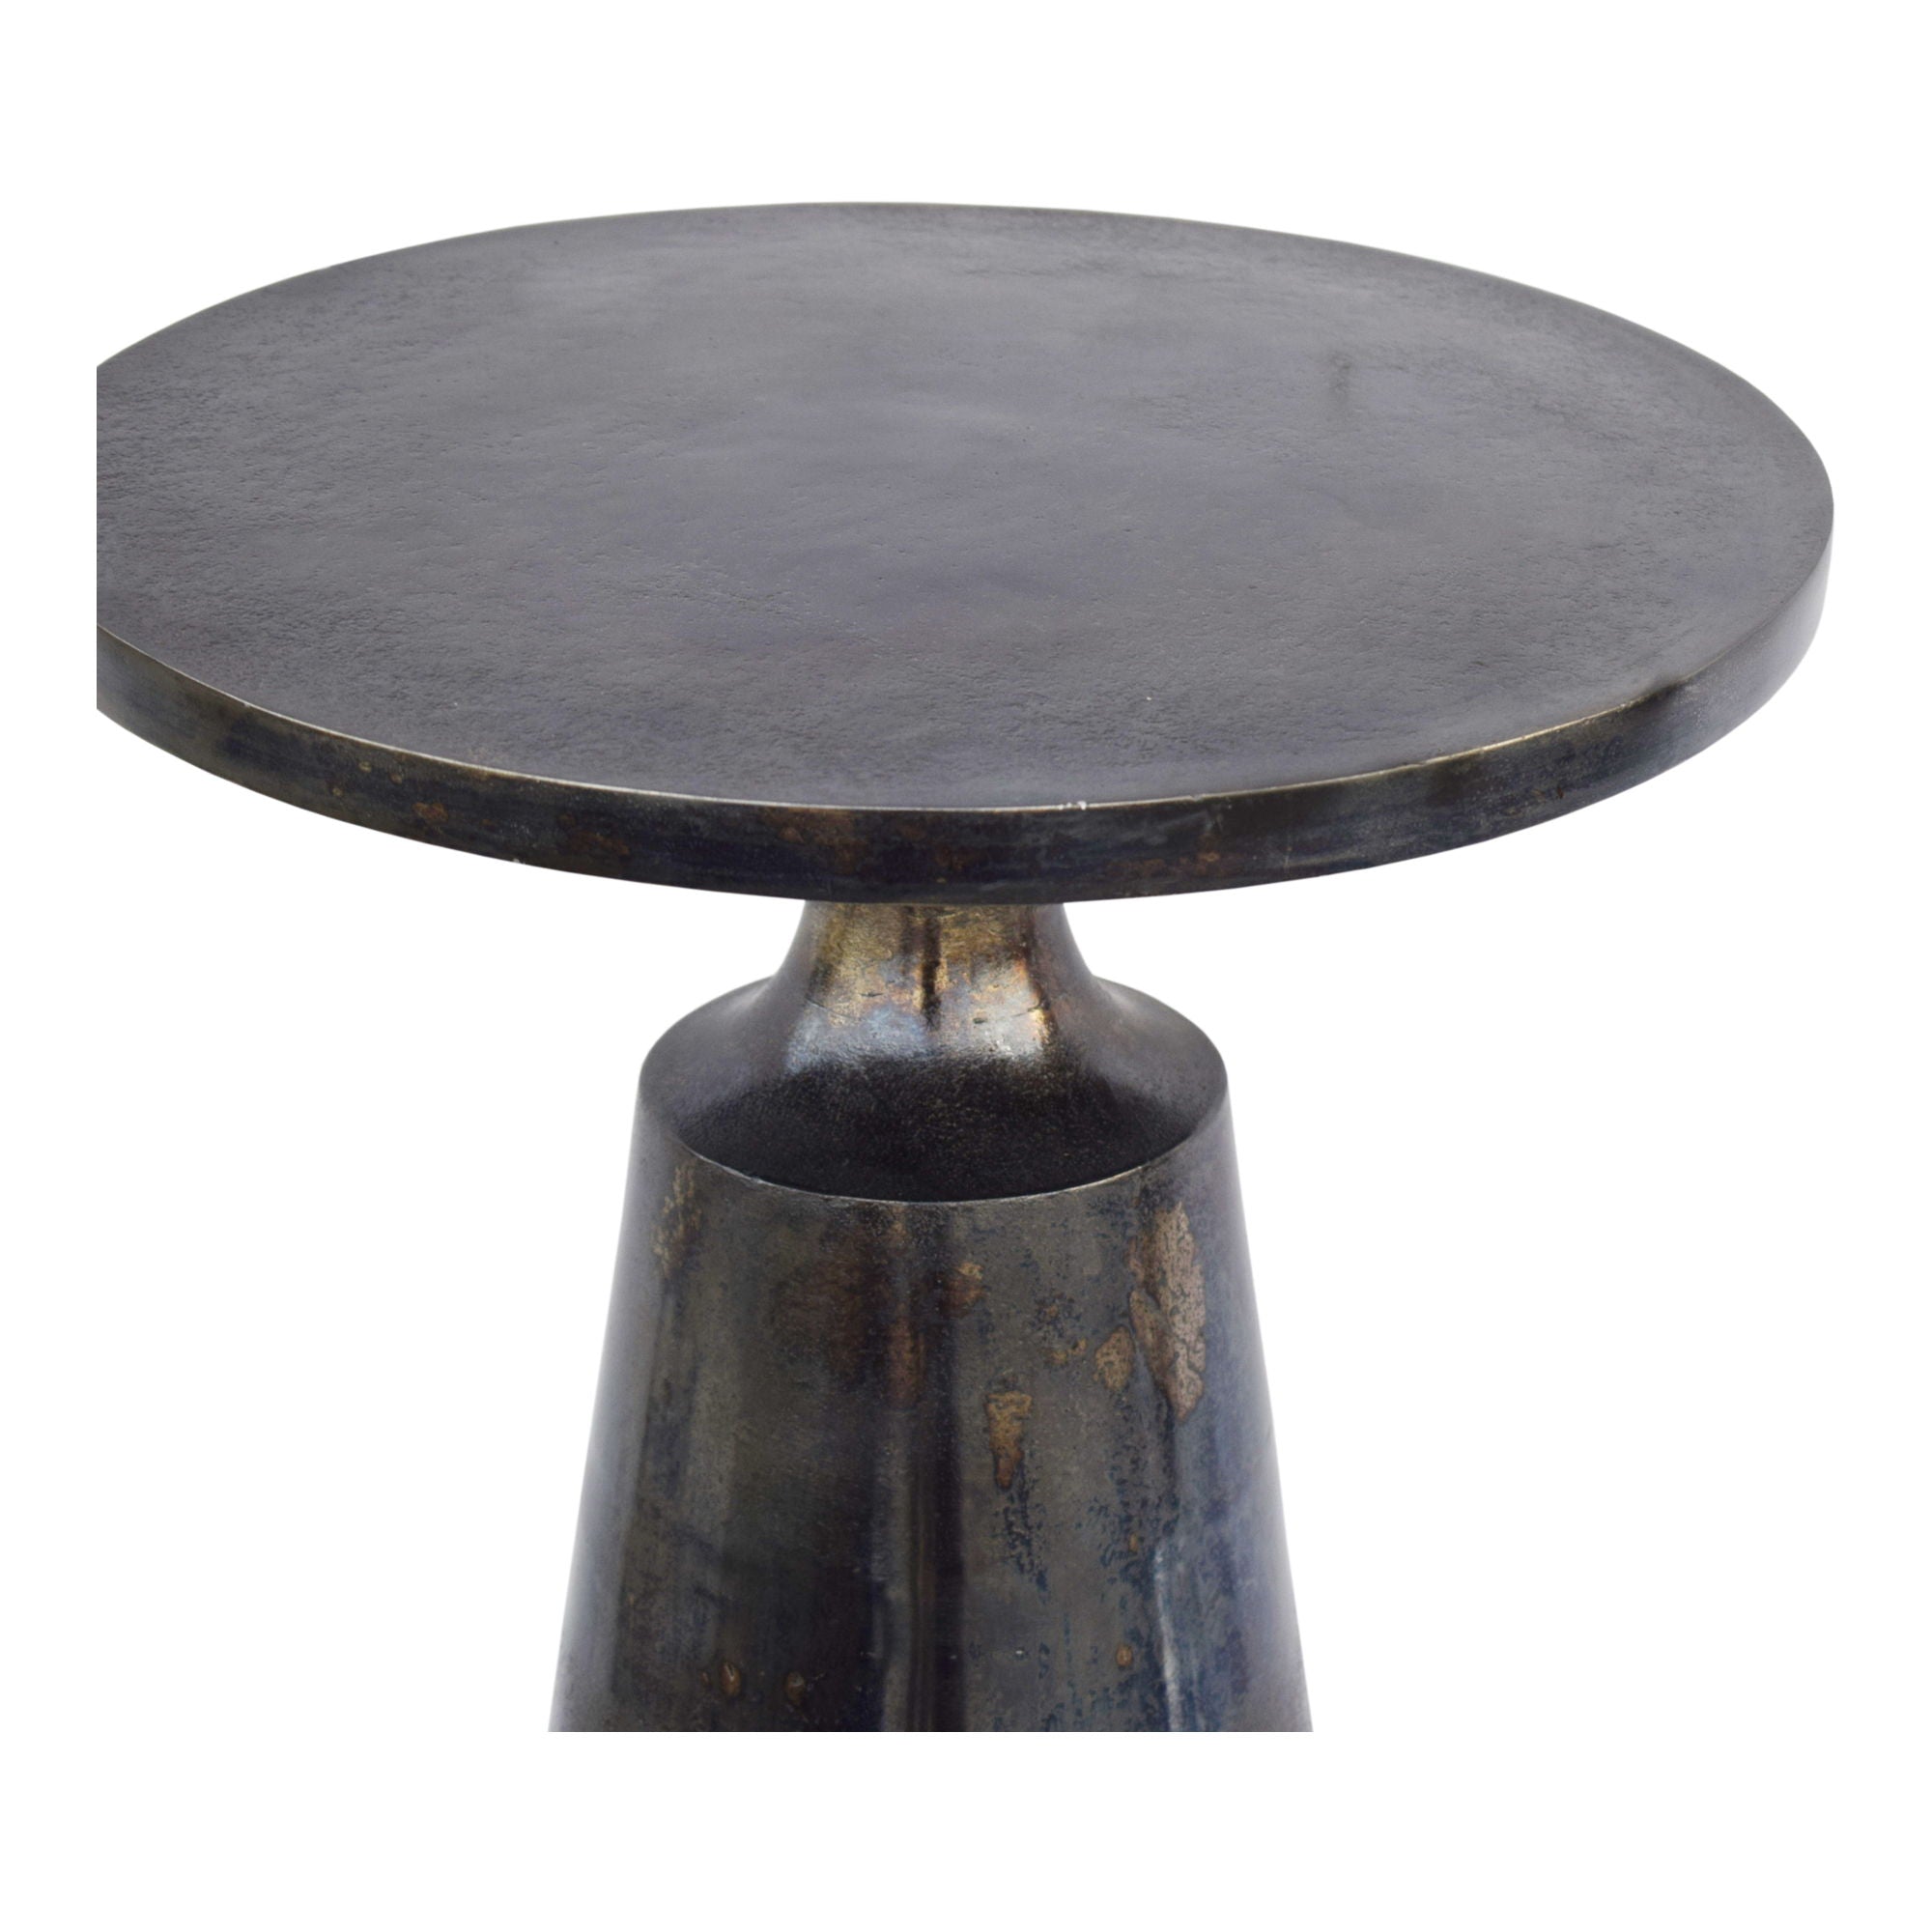 Sonja - Accent Table - Gray